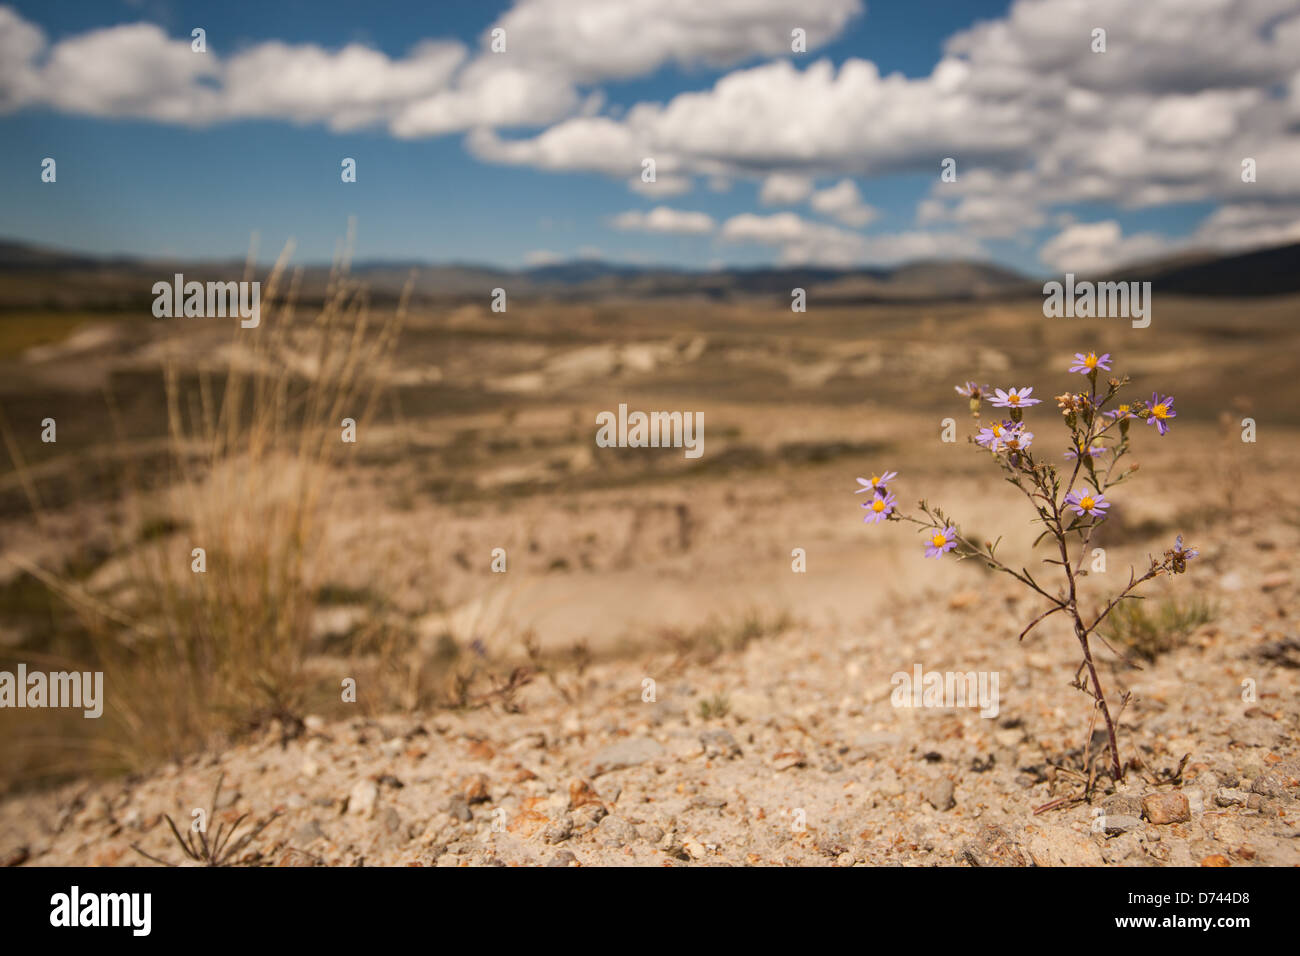 Photograph of a purple Astor flower growing in the arid landscape of the badlands. Stock Photo